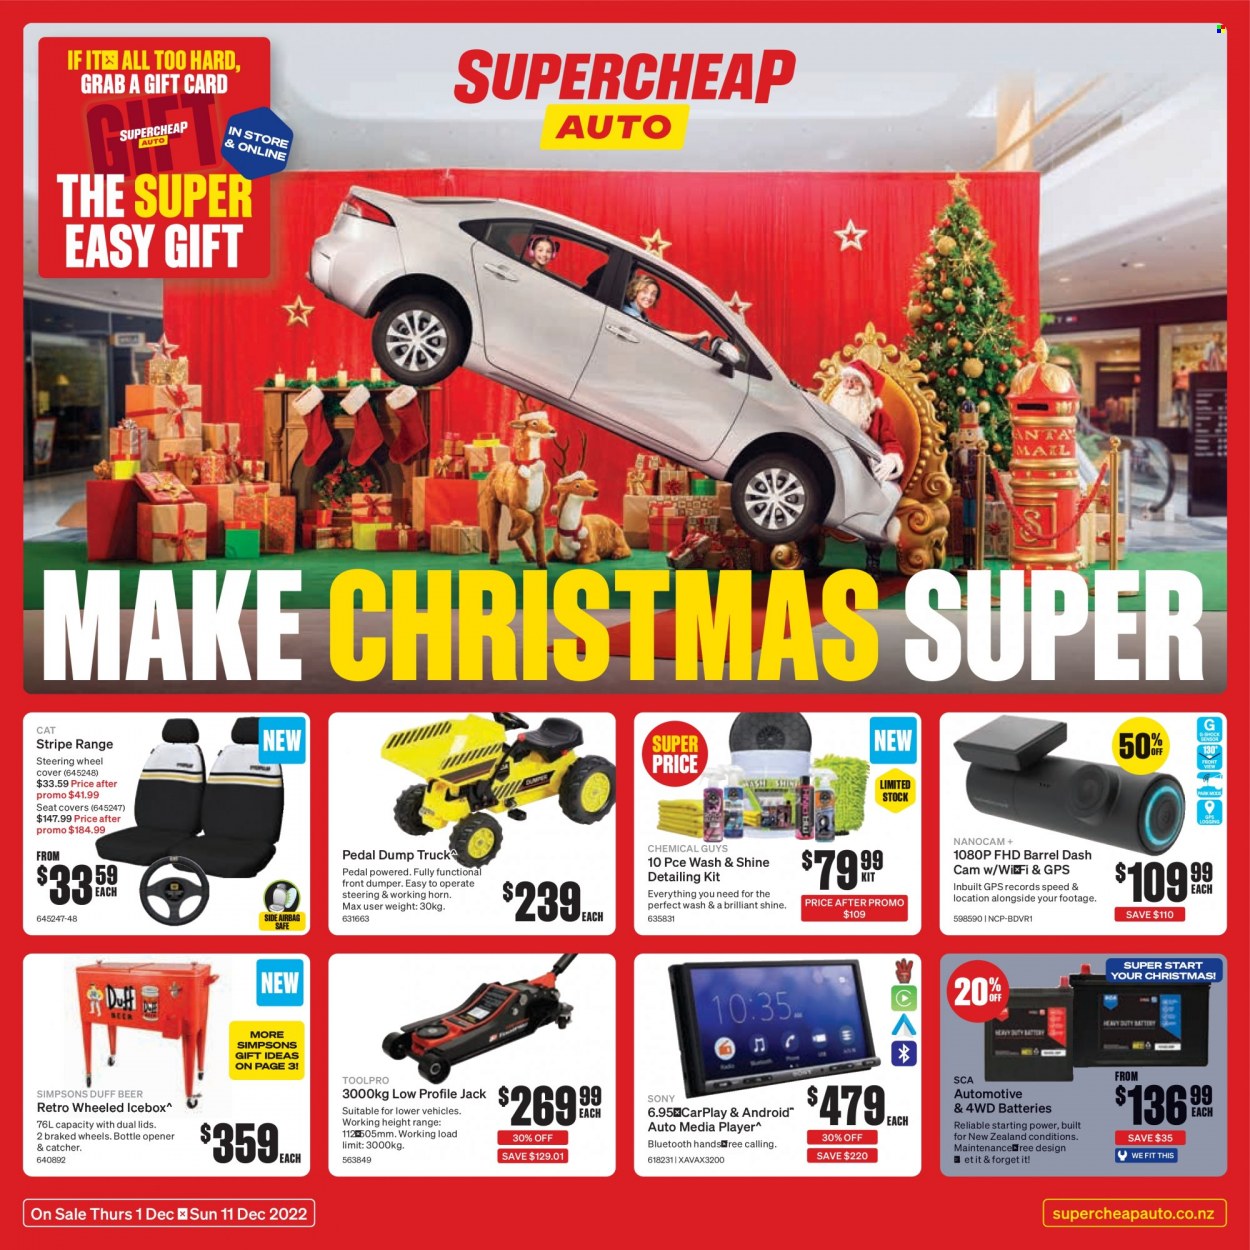 thumbnail - SuperCheap Auto mailer - 01.12.2022 - 11.12.2022 - Sales products - bottle opener, battery, Sony, dashboard camera, media player, car seat cover, low profile jack, car battery, automotive batteries, wheel covers. Page 2.